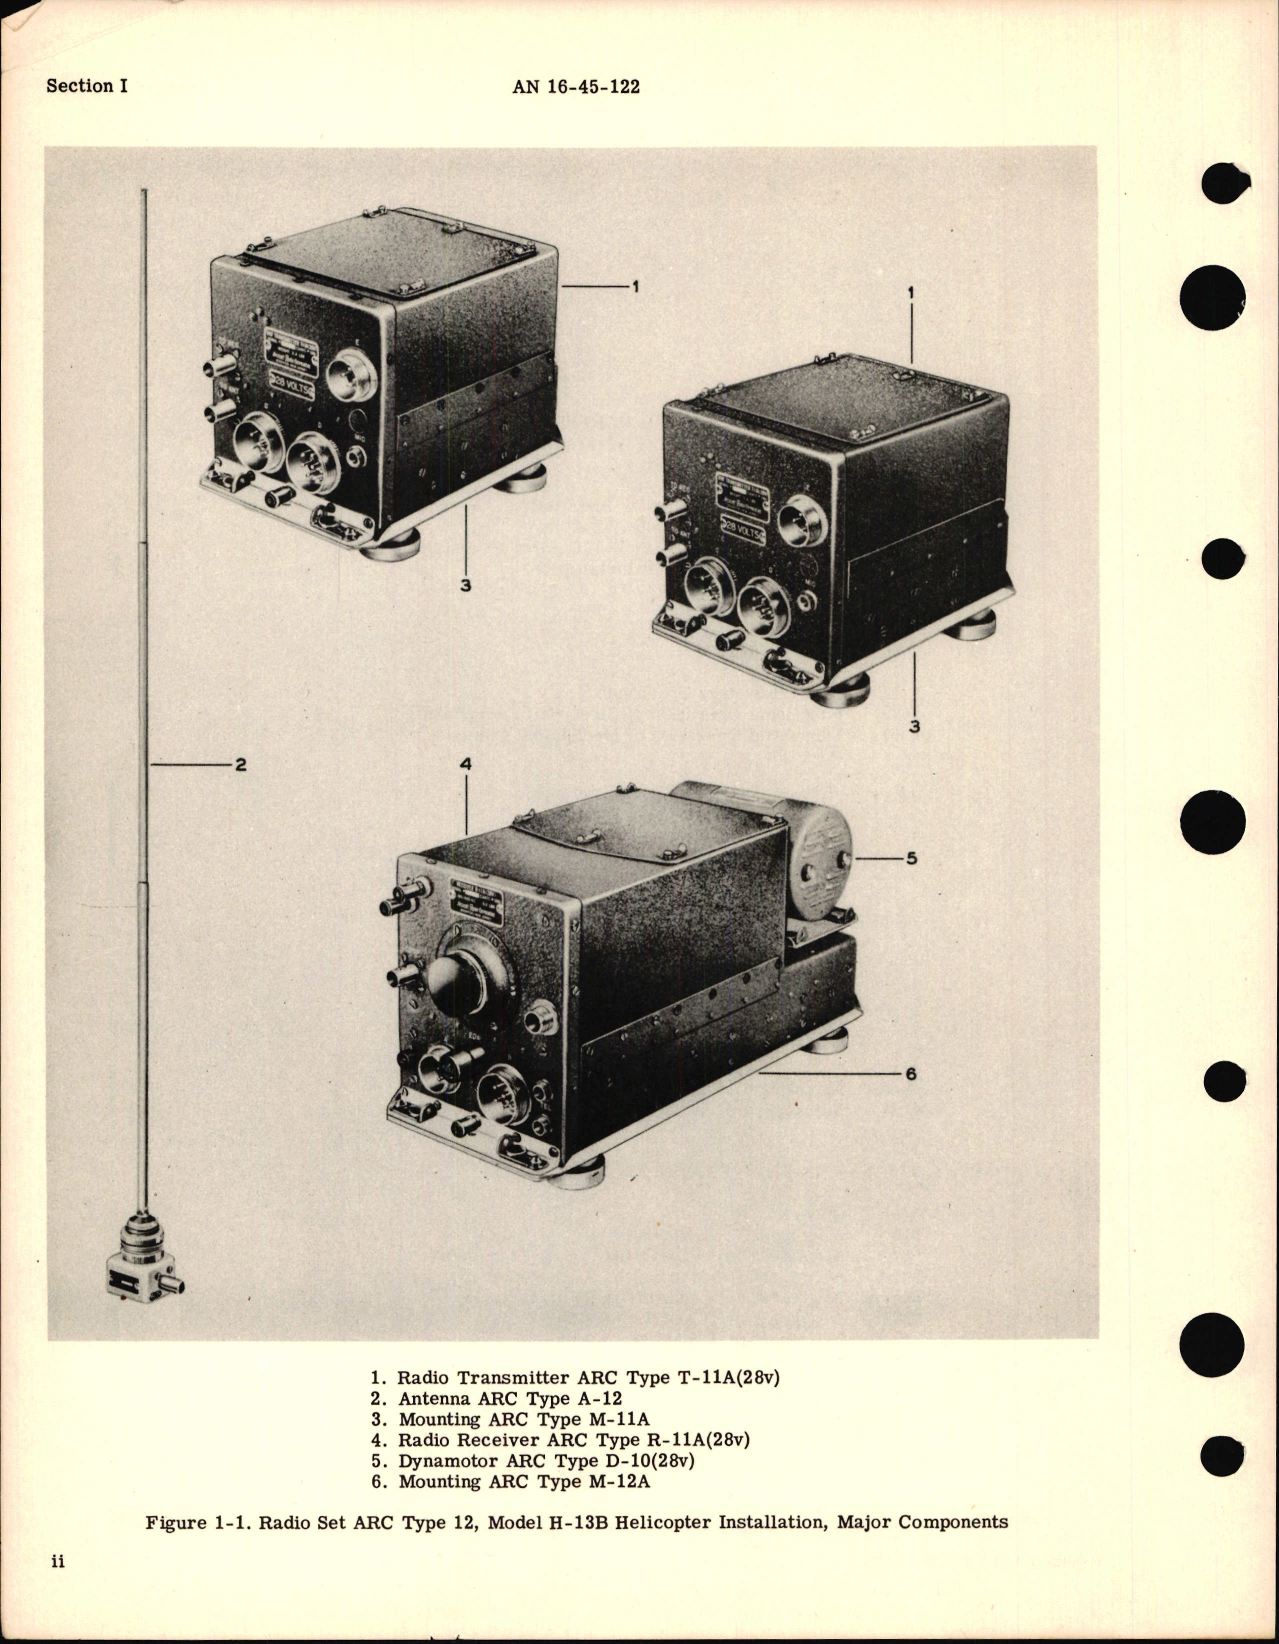 Sample page 6 from AirCorps Library document: Maintenance Instructions for Radio Set ARC Type 12